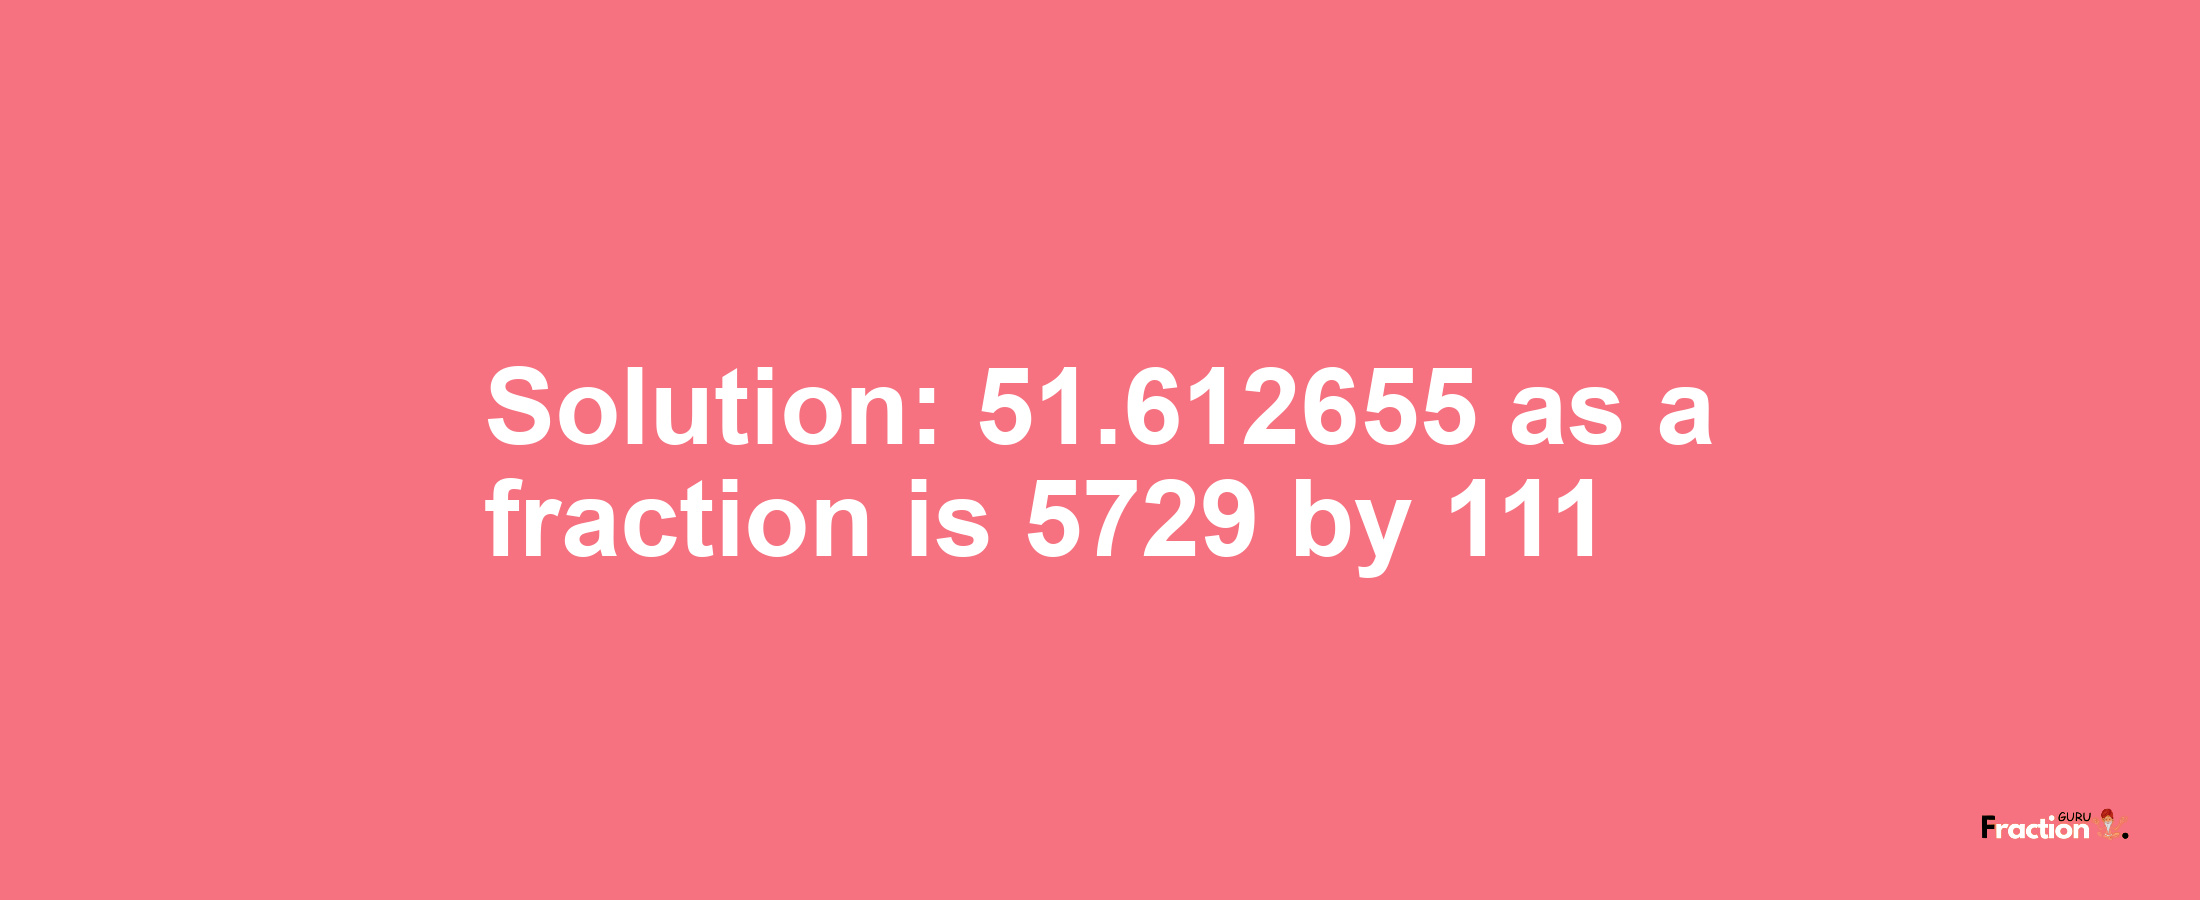 Solution:51.612655 as a fraction is 5729/111